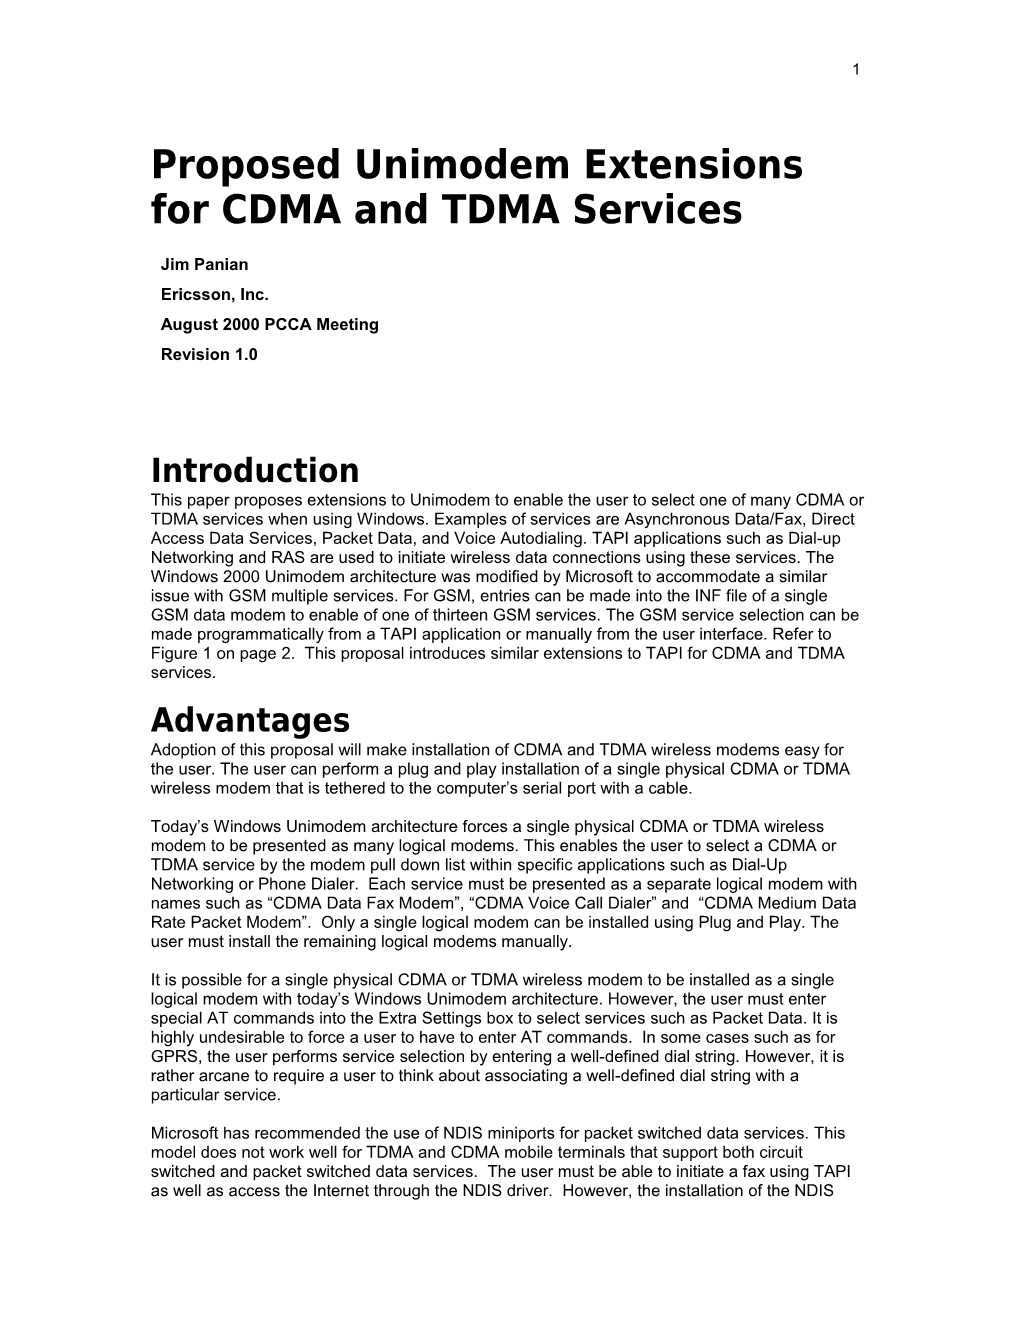 Recommendations for Unimodem Updates for CDMA and TDMA Data Services